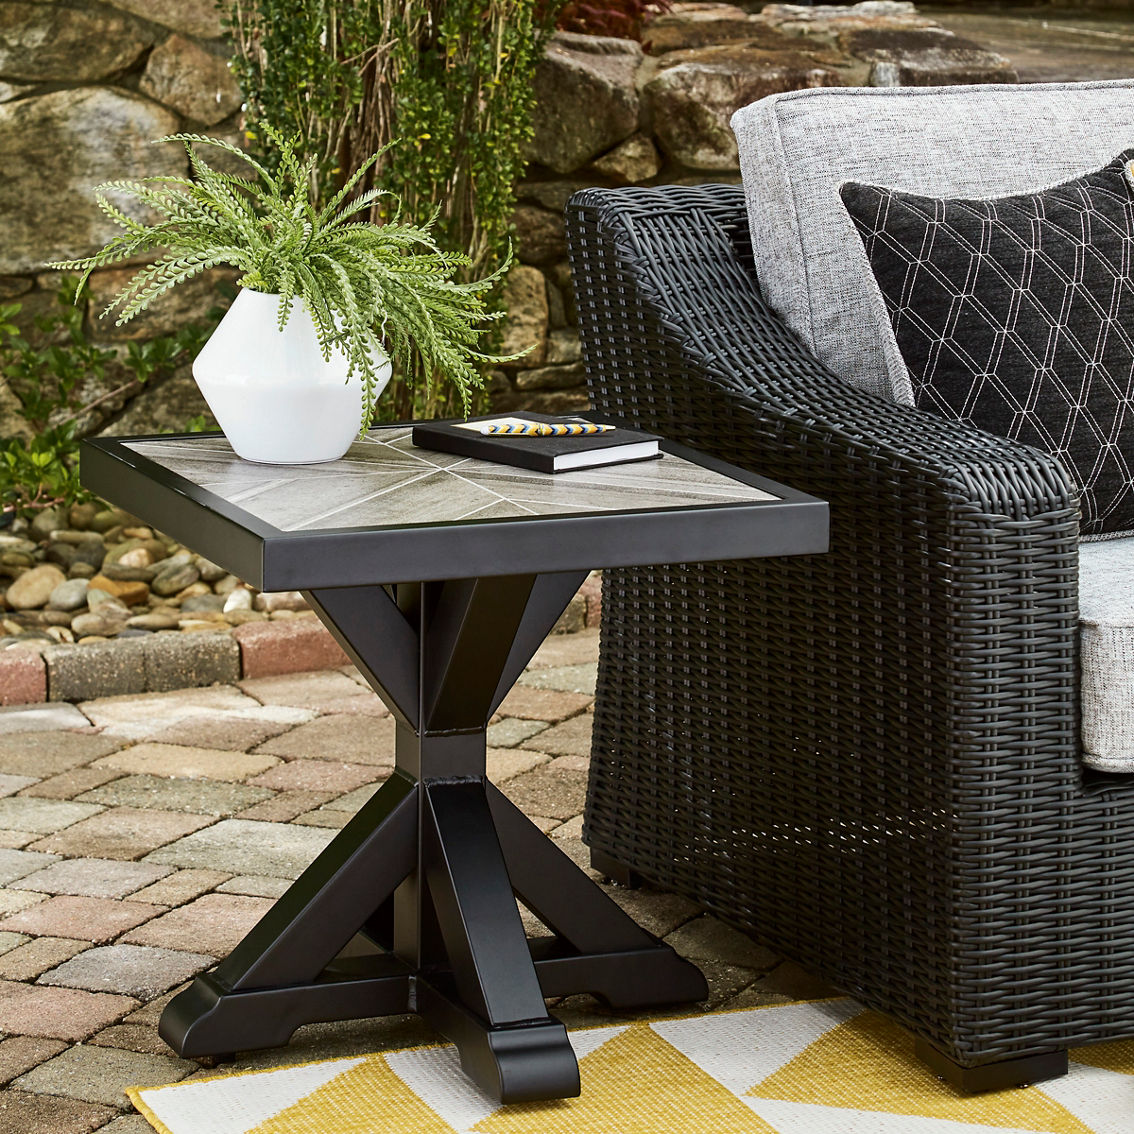 Signature Design by Ashley Beachcroft 5 pc. Outdoor Set including Firepit Table - Image 6 of 7